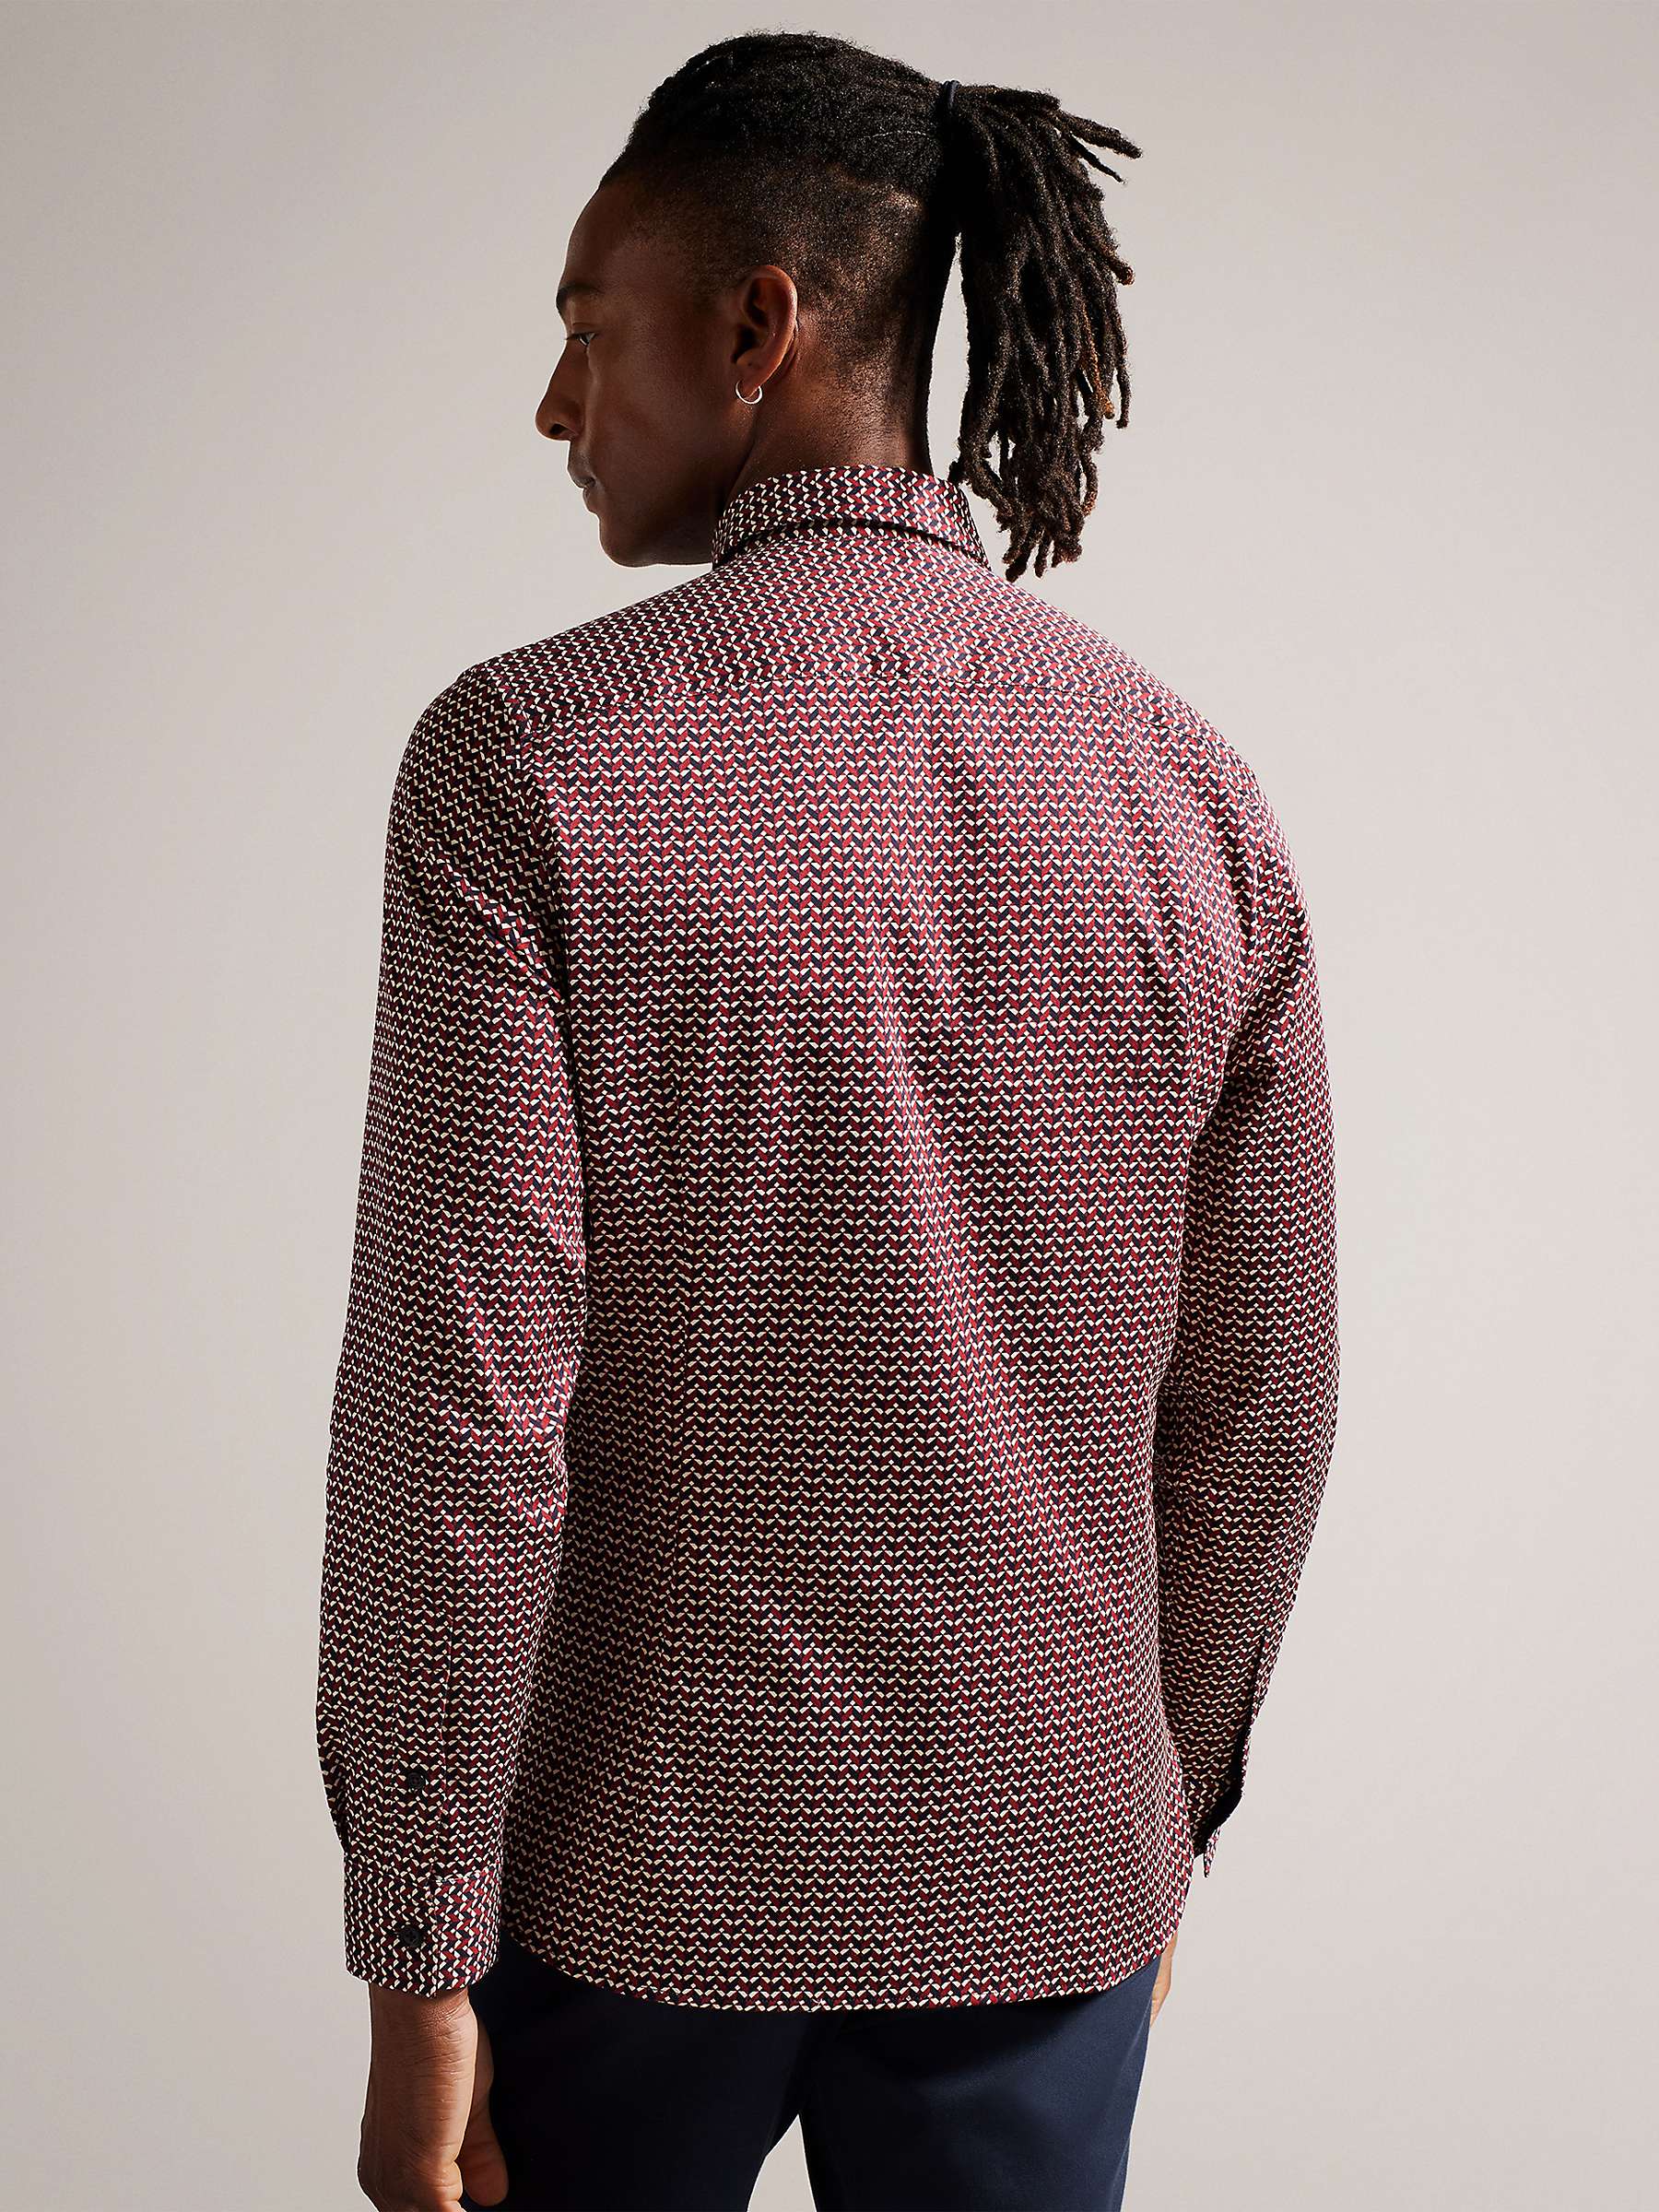 Buy Ted Baker Laceby Geometric Printed Long Sleeve Shirt Online at johnlewis.com